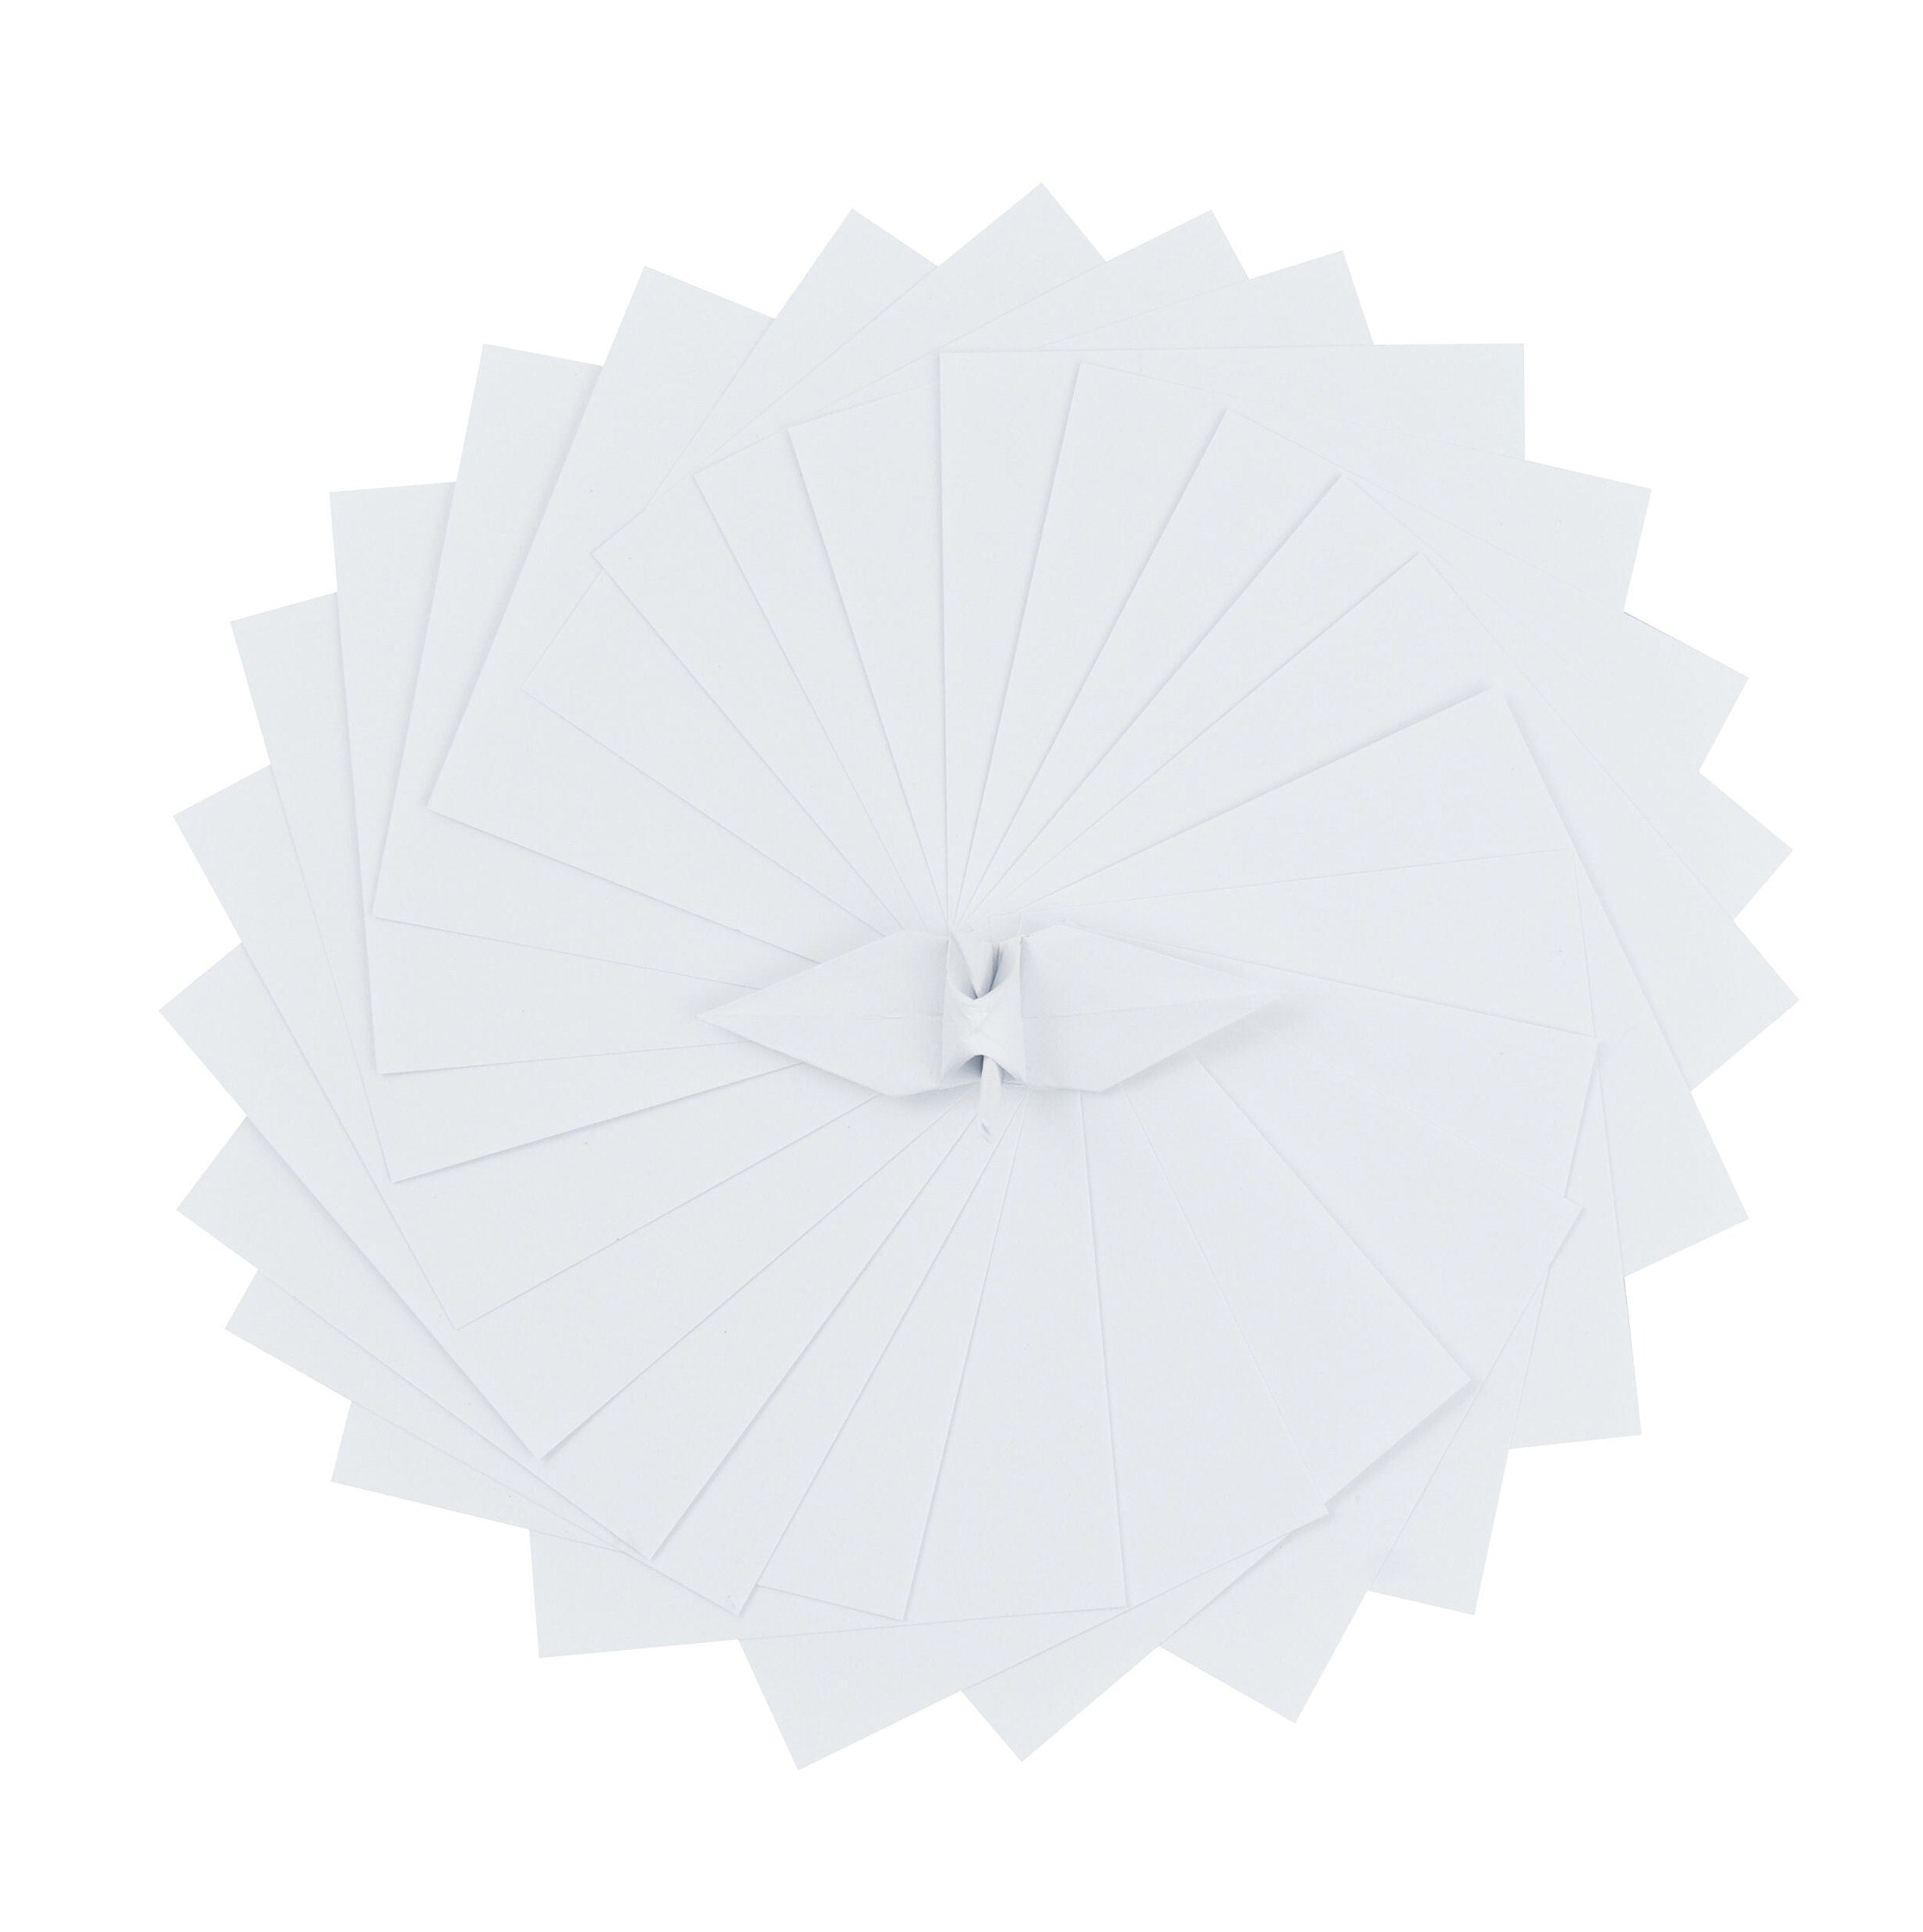 1000 White Origami Paper Sheets 3x3 inches Square Paper Pack